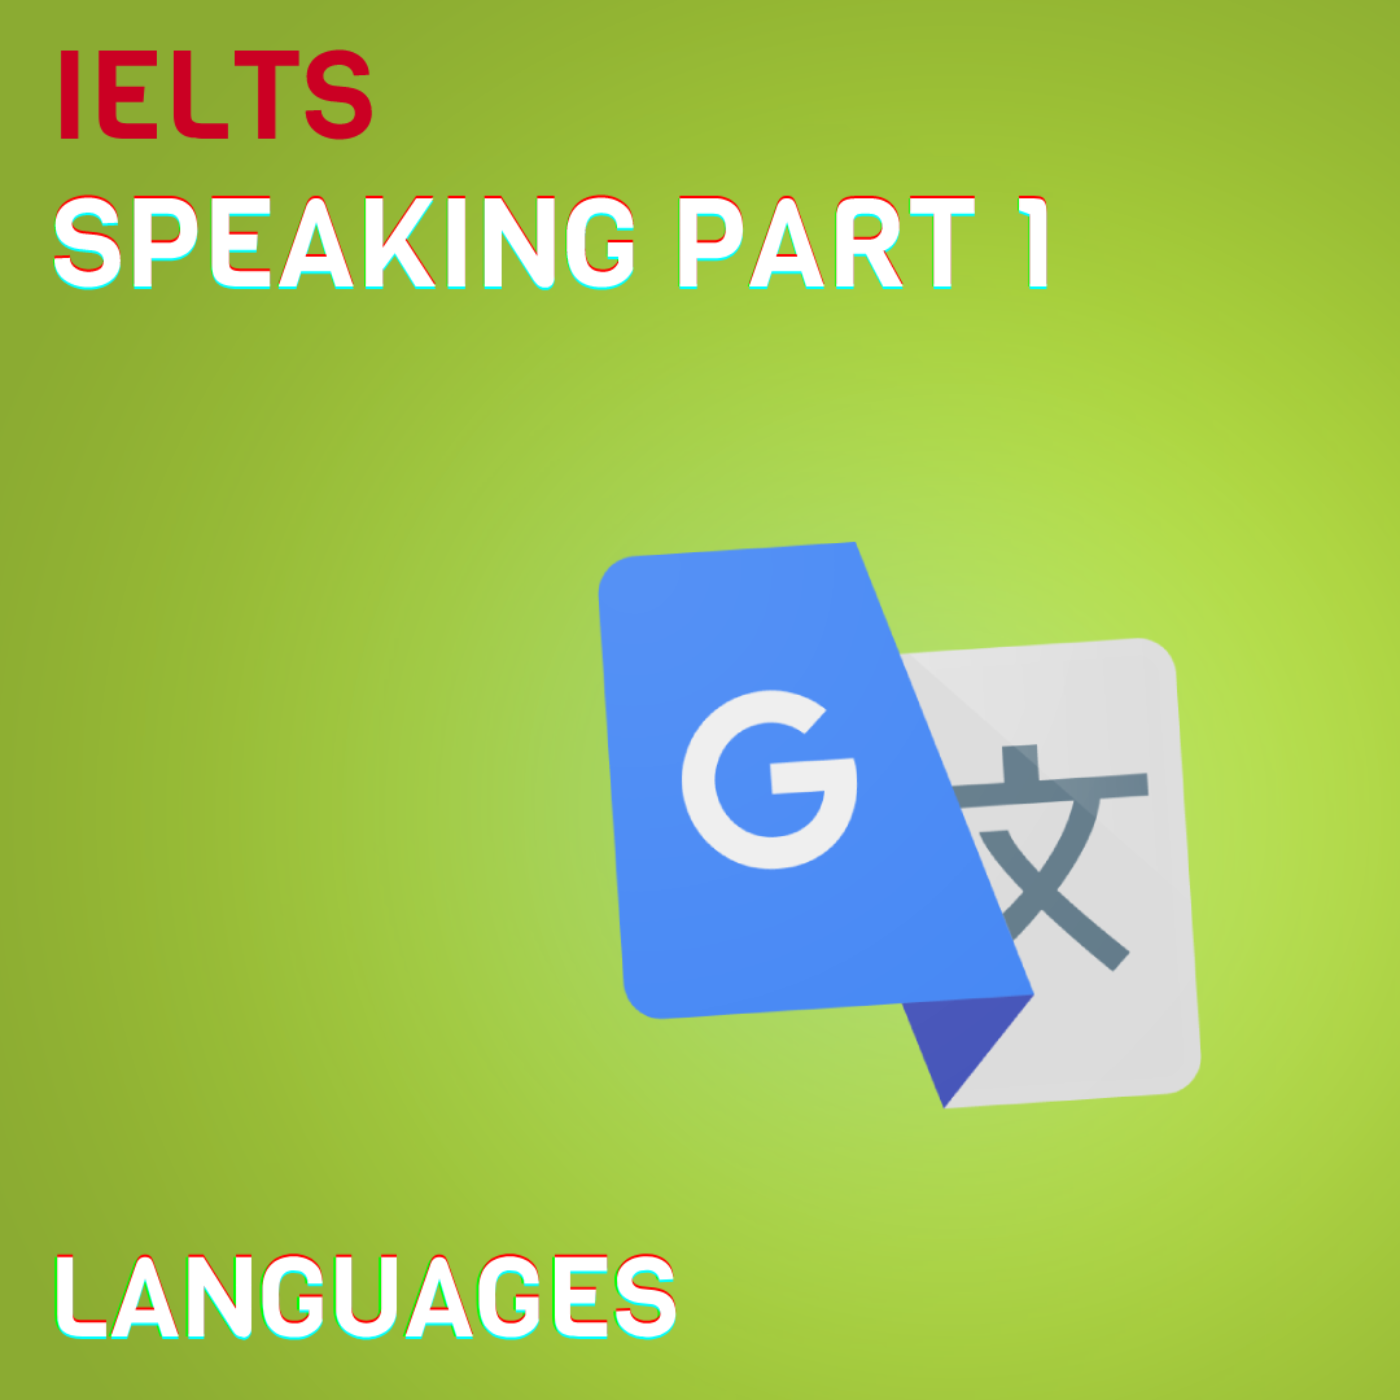 IELTS Speaking Part 1 - Languages (Answers and vocabulary)